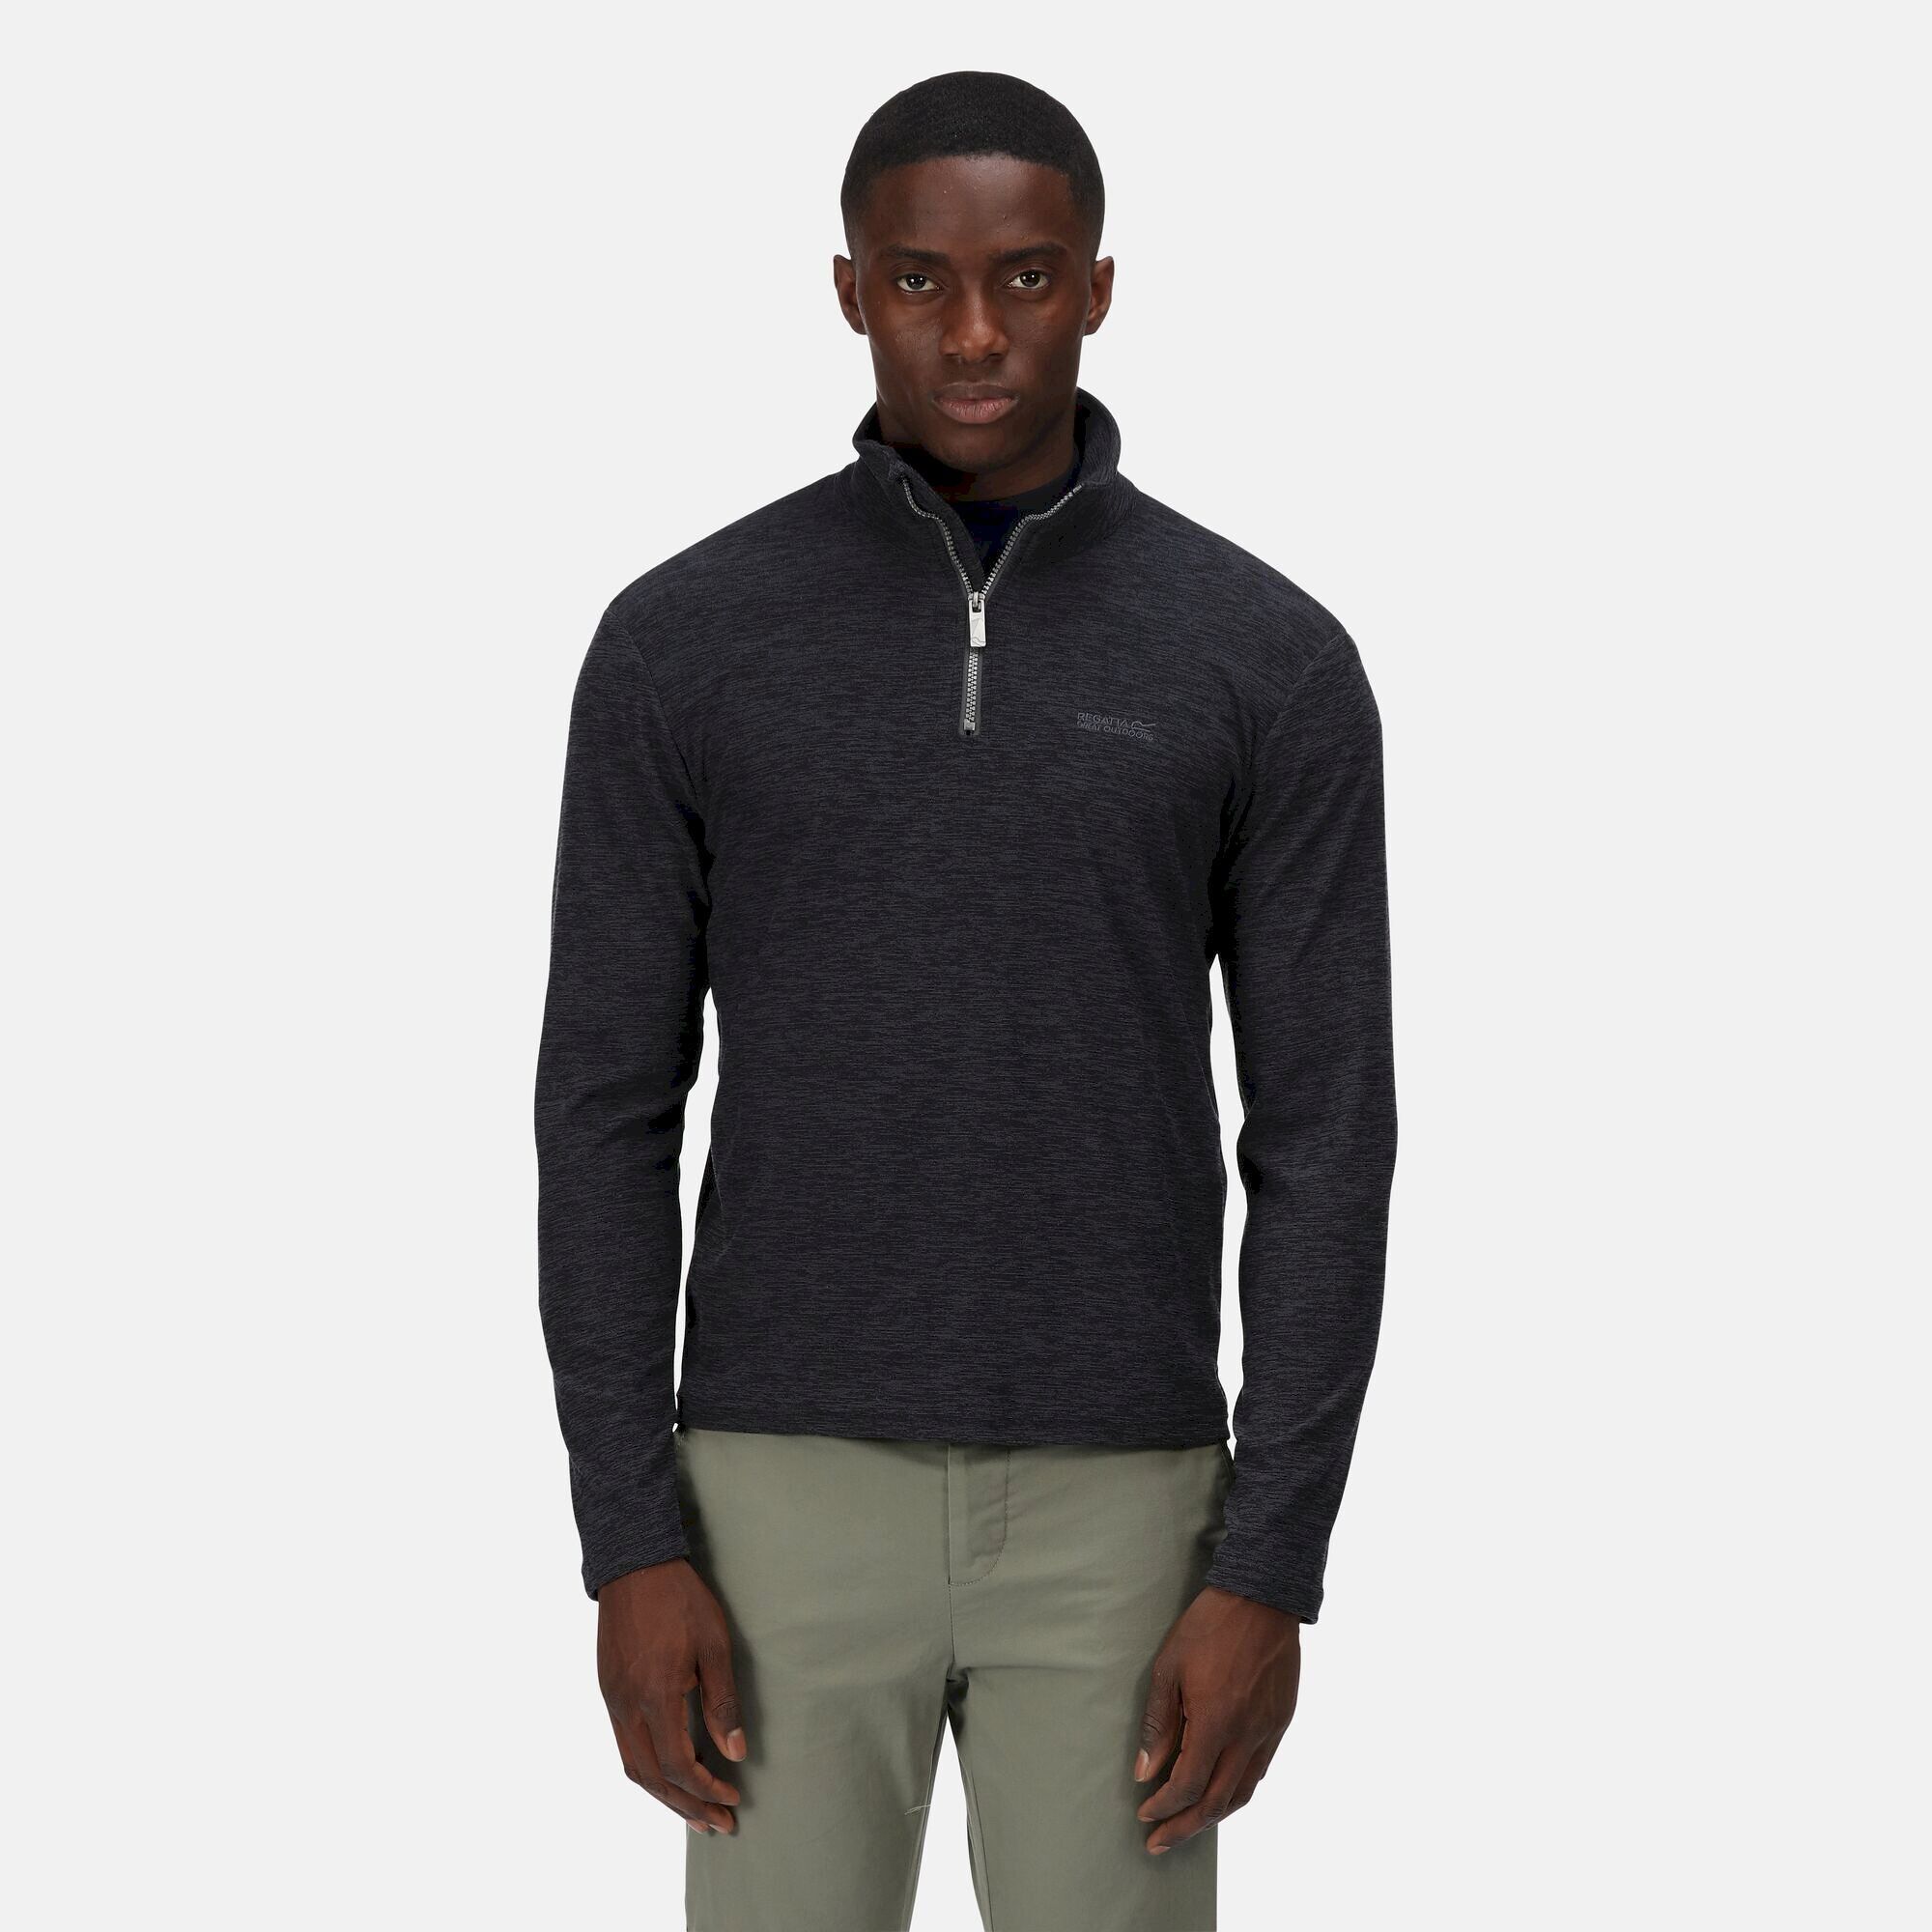 Material: 96% Polyester, 4% Elastane. Lightweight fleece pullover with a subtle herringbone pattern and zip neck. Breeze blocking stand collar. Regatta outdoors badge on the left sleeve.